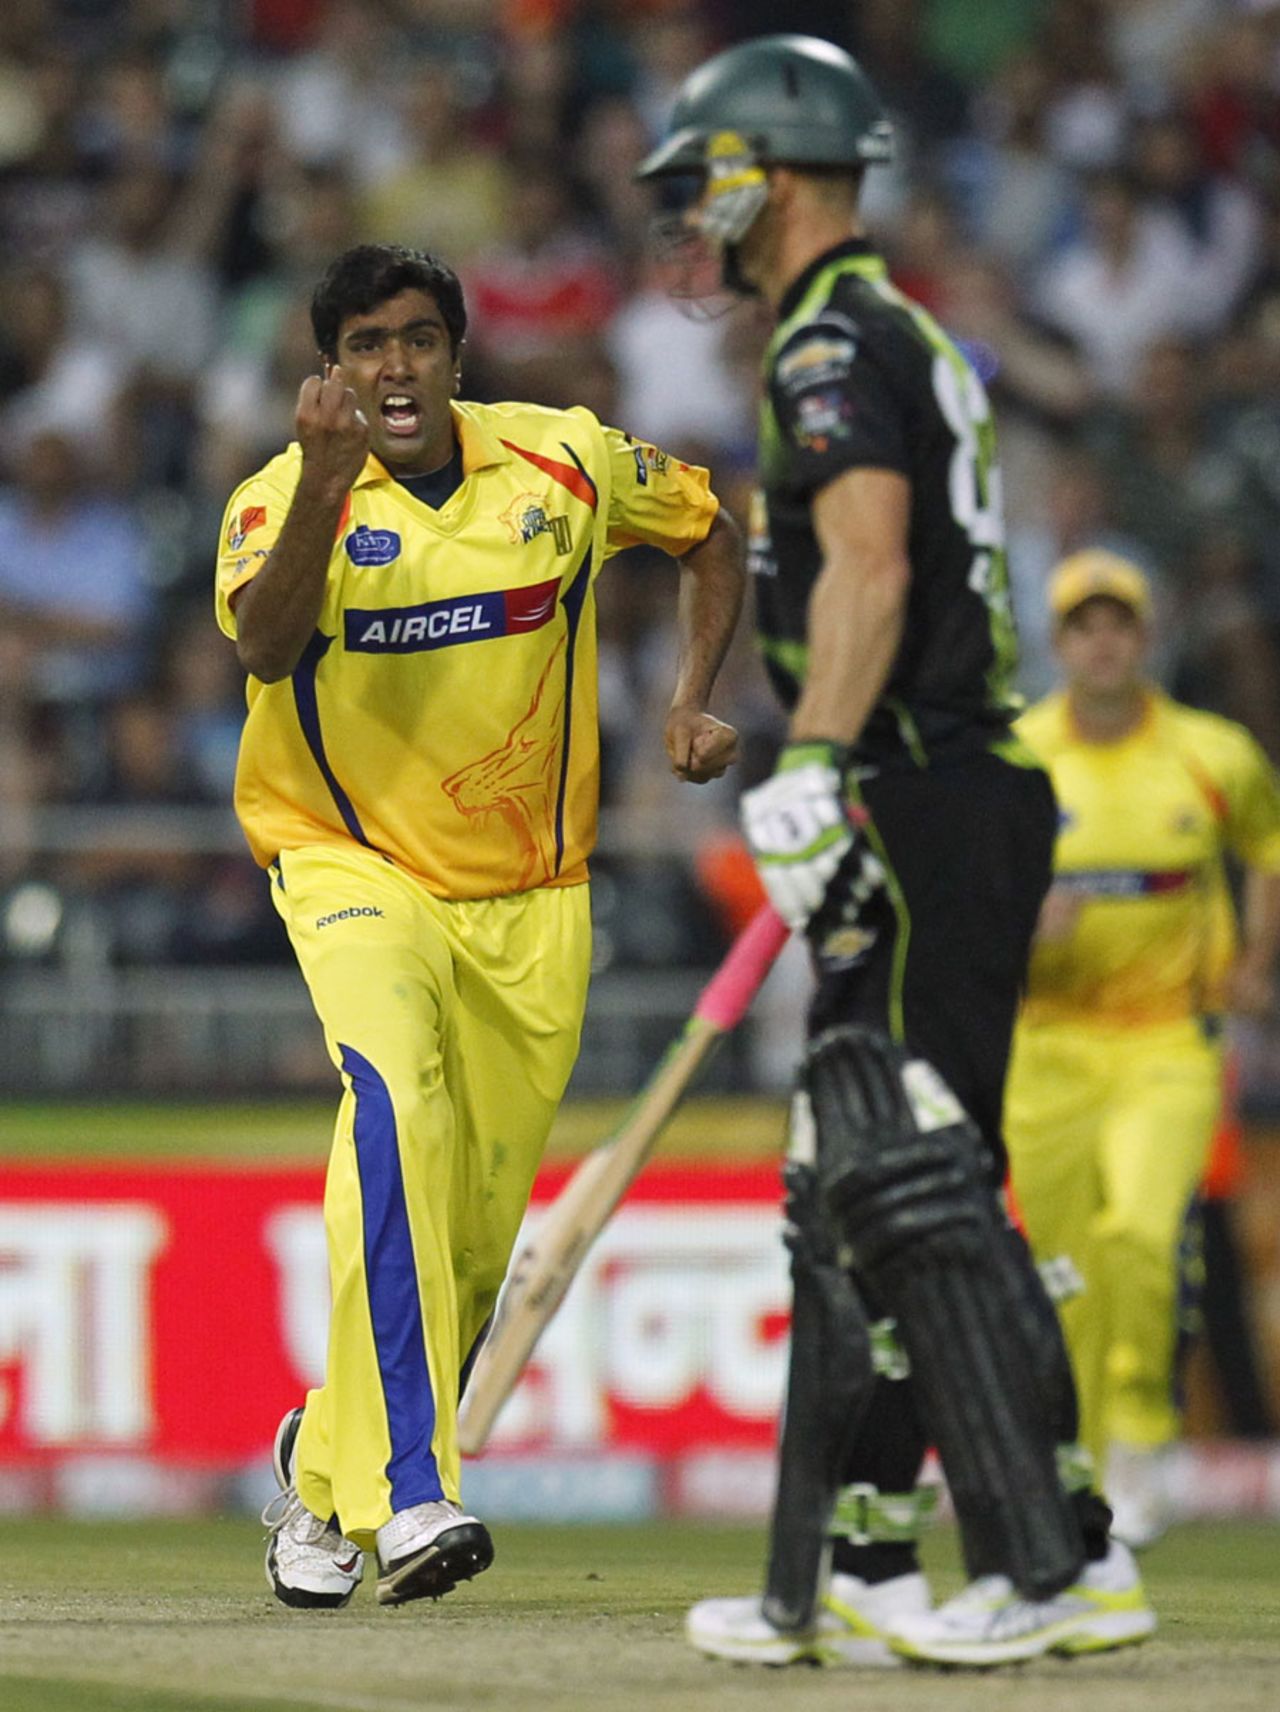 R Ashwin exults after trapping Davy Jacobs leg before, Warriors v Chennai, Champions League Twenty20, Johannesburg, September 26, 2010